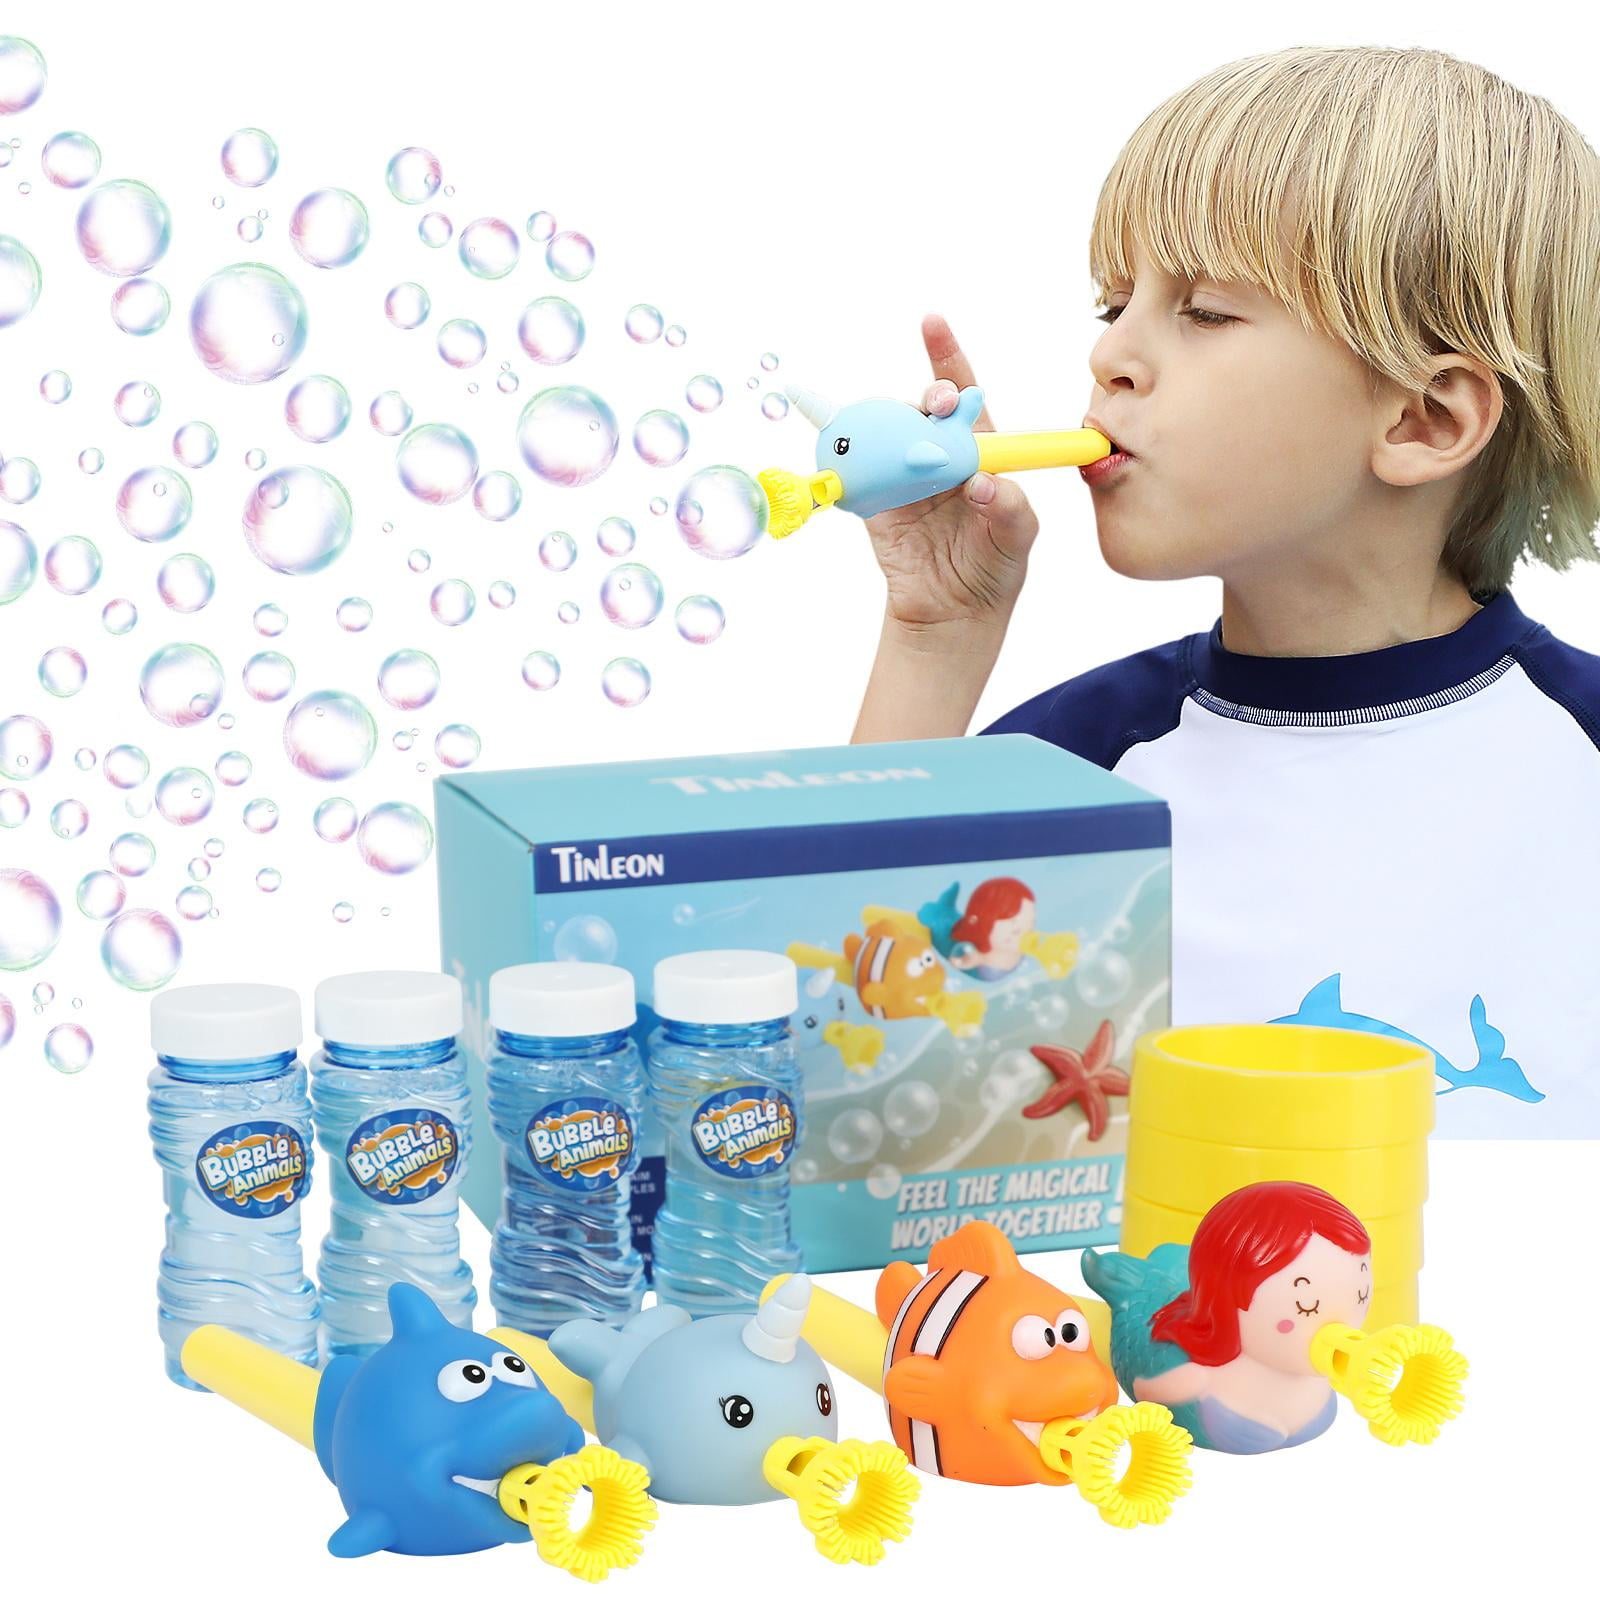 4pcs ABS Plastic Bubble Blower Toy Bubble Making Tools Kid Outdoor Fun Games 